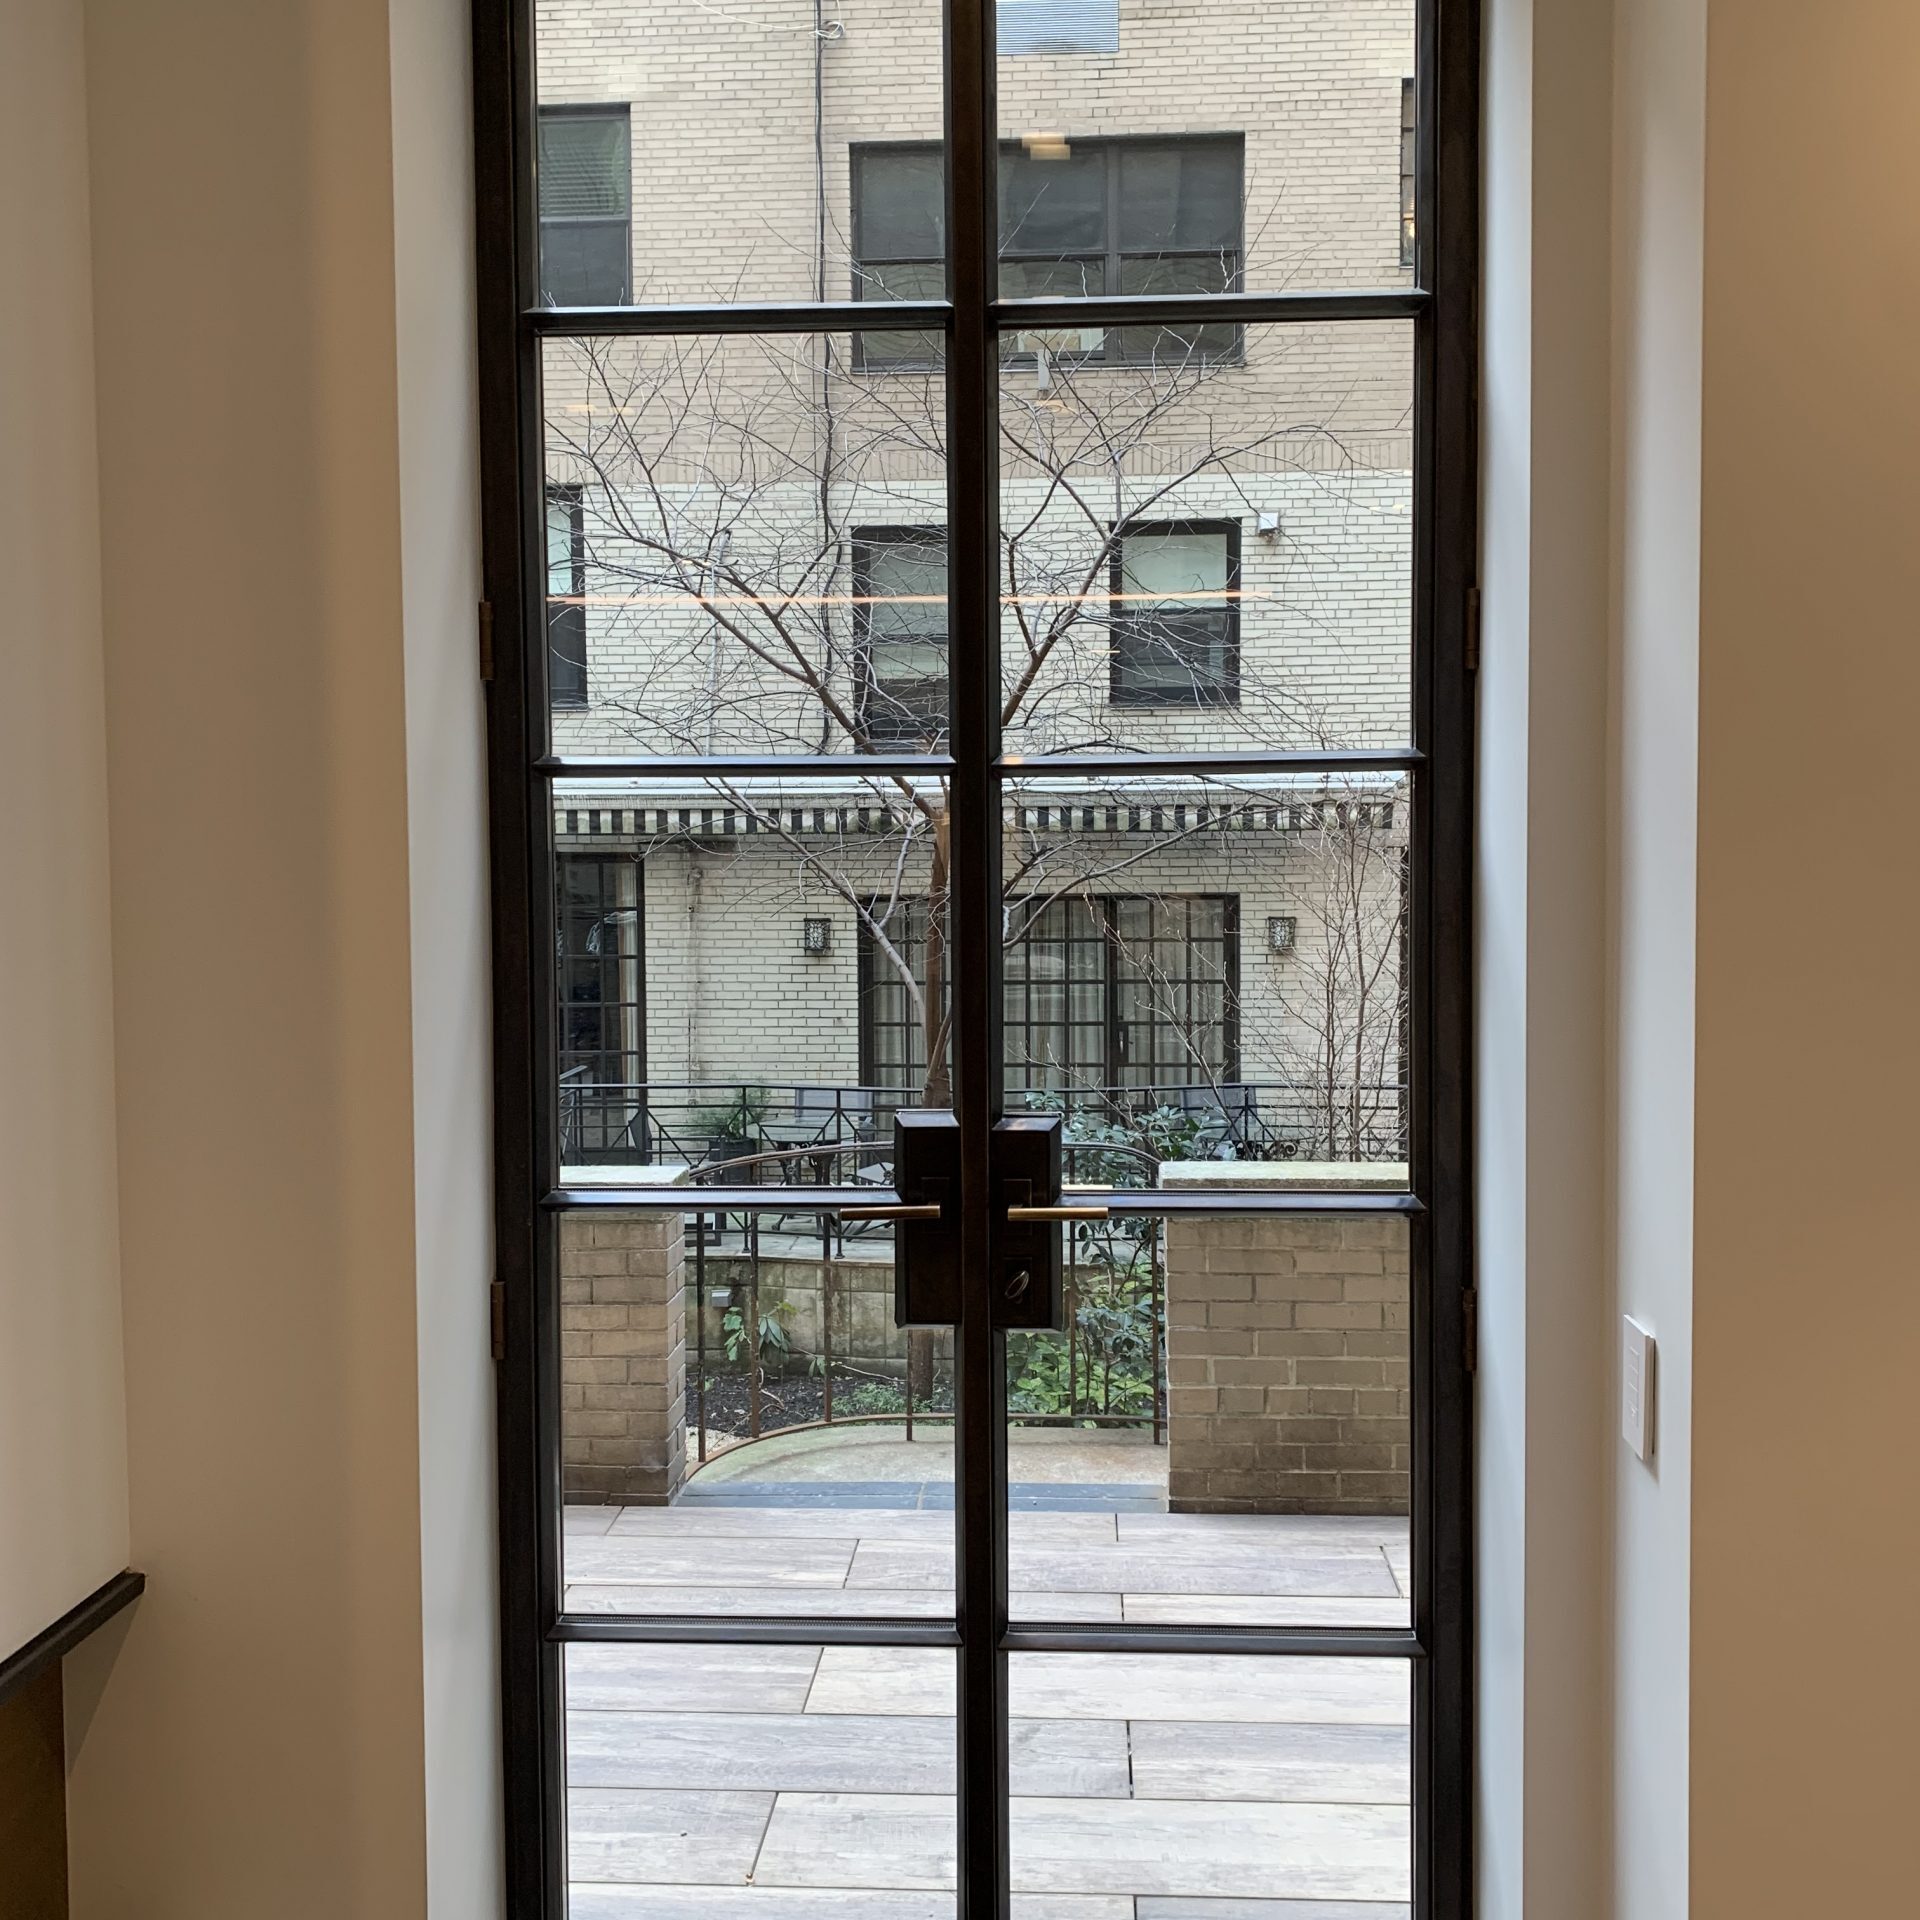 Artistic-Bronze-doors-to-back-yard-retreat-in-NYC-scaled-square